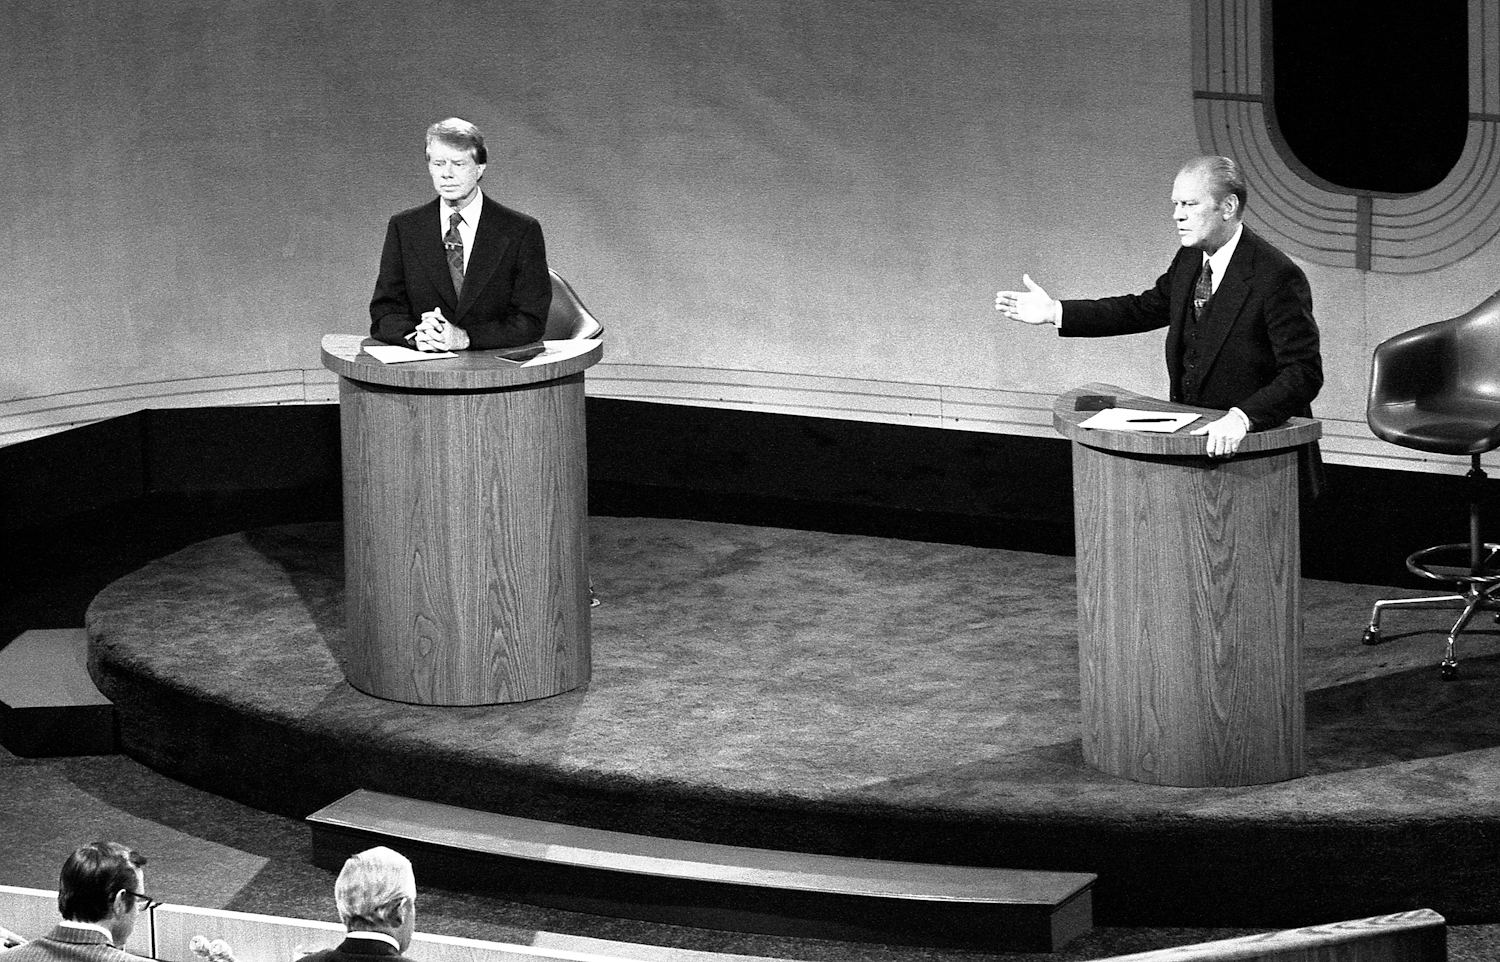 President Ford and Jimmy Carter meet at the Walnut Street Theater in Philadelphiato debate domestic policy during the first of the three Ford-Carter Debates, Sept. 23, 1976.